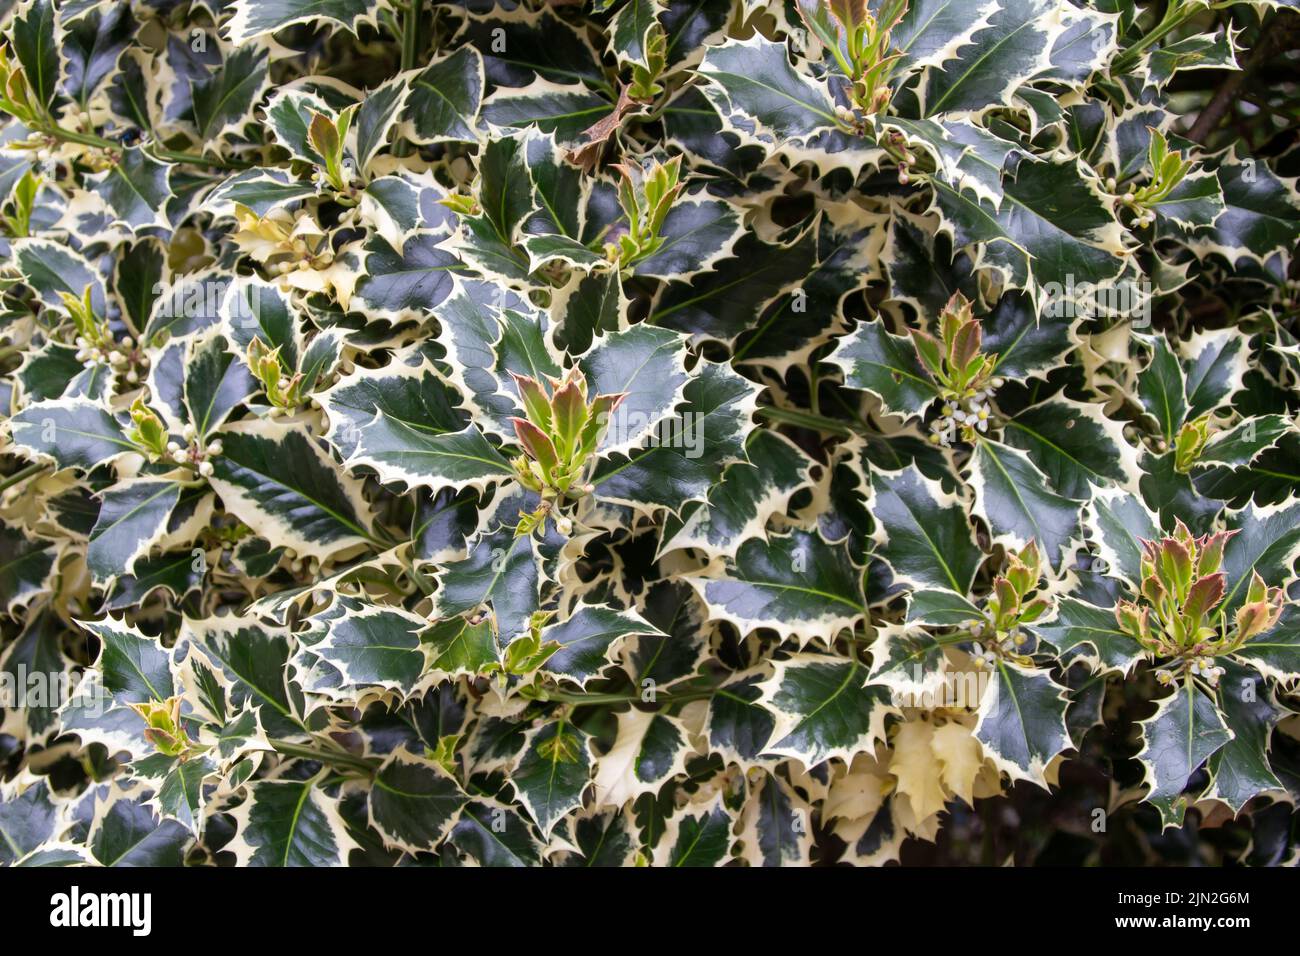 Close up full frame texture background view of a green and white variegated holly bush with lush foliage Stock Photo